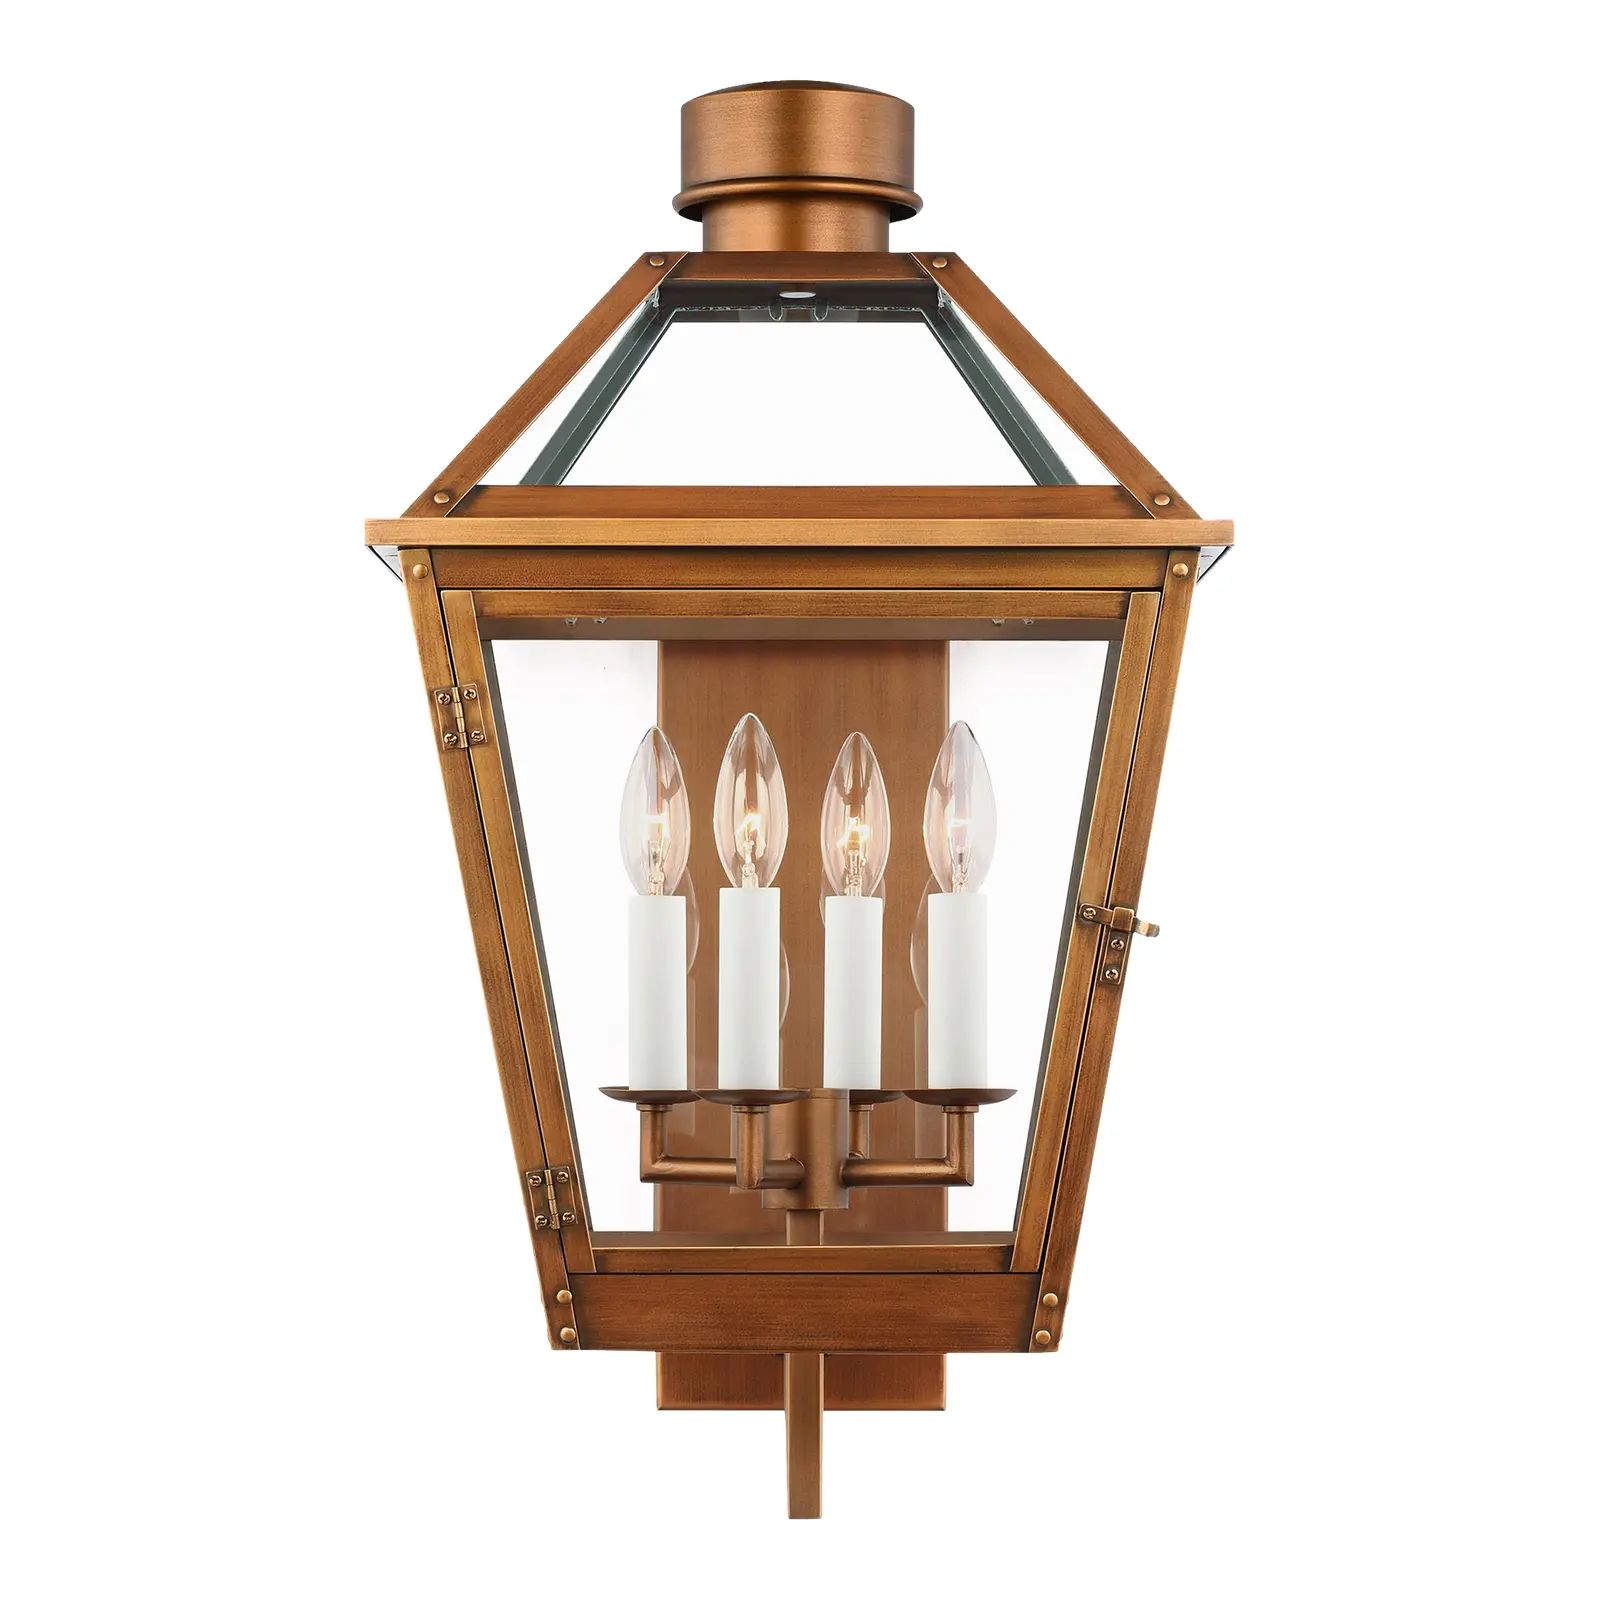 Chapman & Myers by Generation Lighting Hyannis Large Lantern, Natural Copper | Chairish